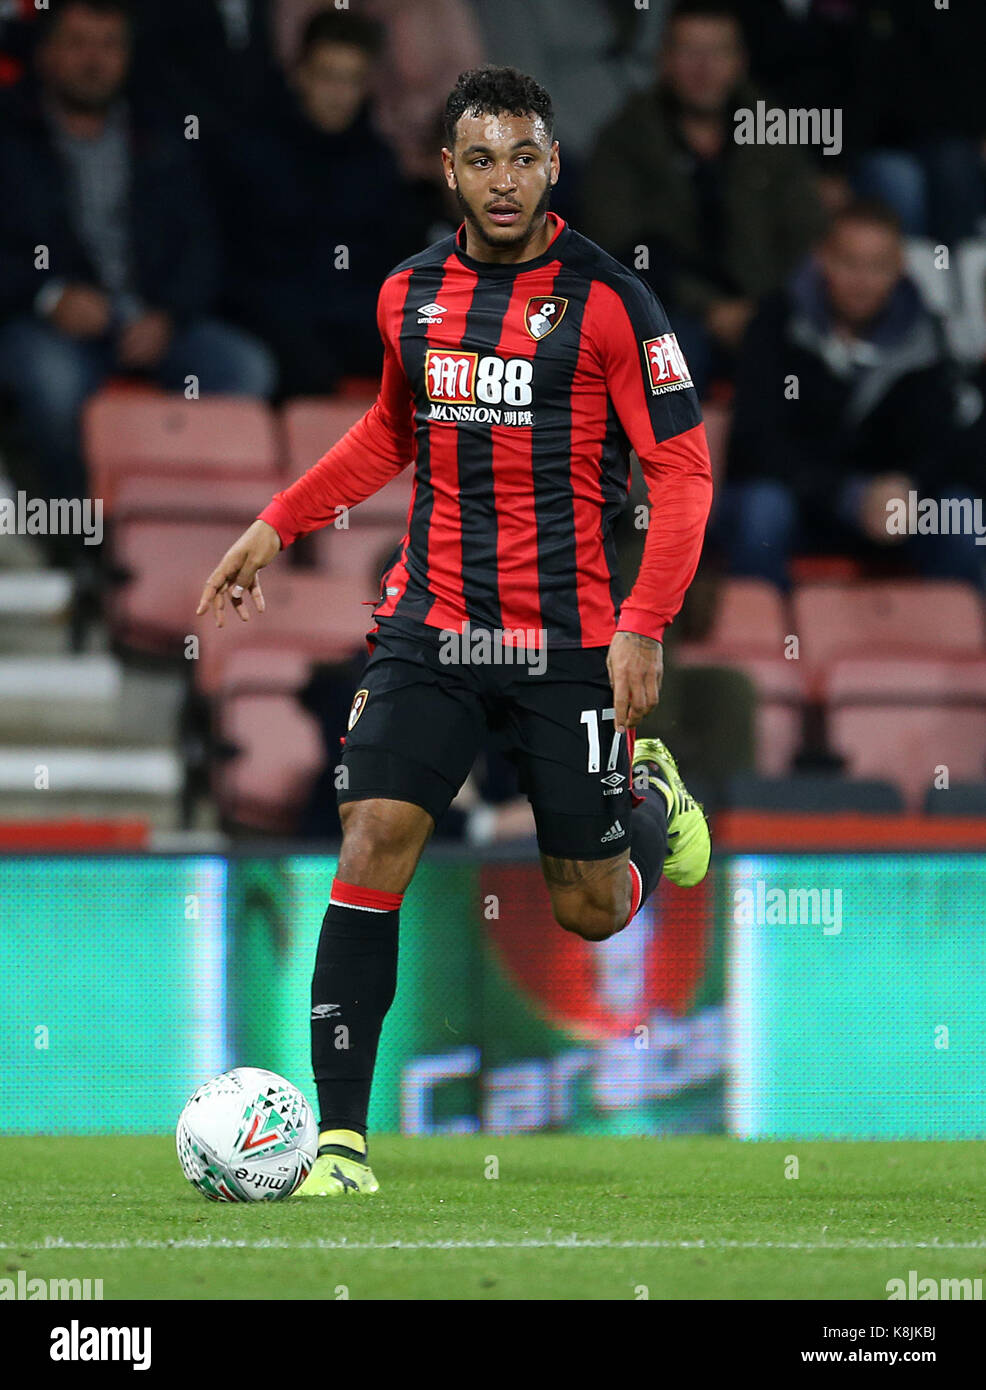 AFC Bournemouth Josh King in action during the Carabao Cup, third round match at the Vitality Stadium, Bournemouth. PRESS ASSOCIATION Photo. Picture date: Tuesday September 19, 2017. See PA story SOCCER Bournemouth. Photo credit should read: Steven Paston/PA Wire. RESTRICTIONS: No use with unauthorised audio, video, data, fixture lists, club/league logos or 'live' services. Online in-match use limited to 75 images, no video emulation. No use in betting, games or single club/league/player publications. Stock Photo